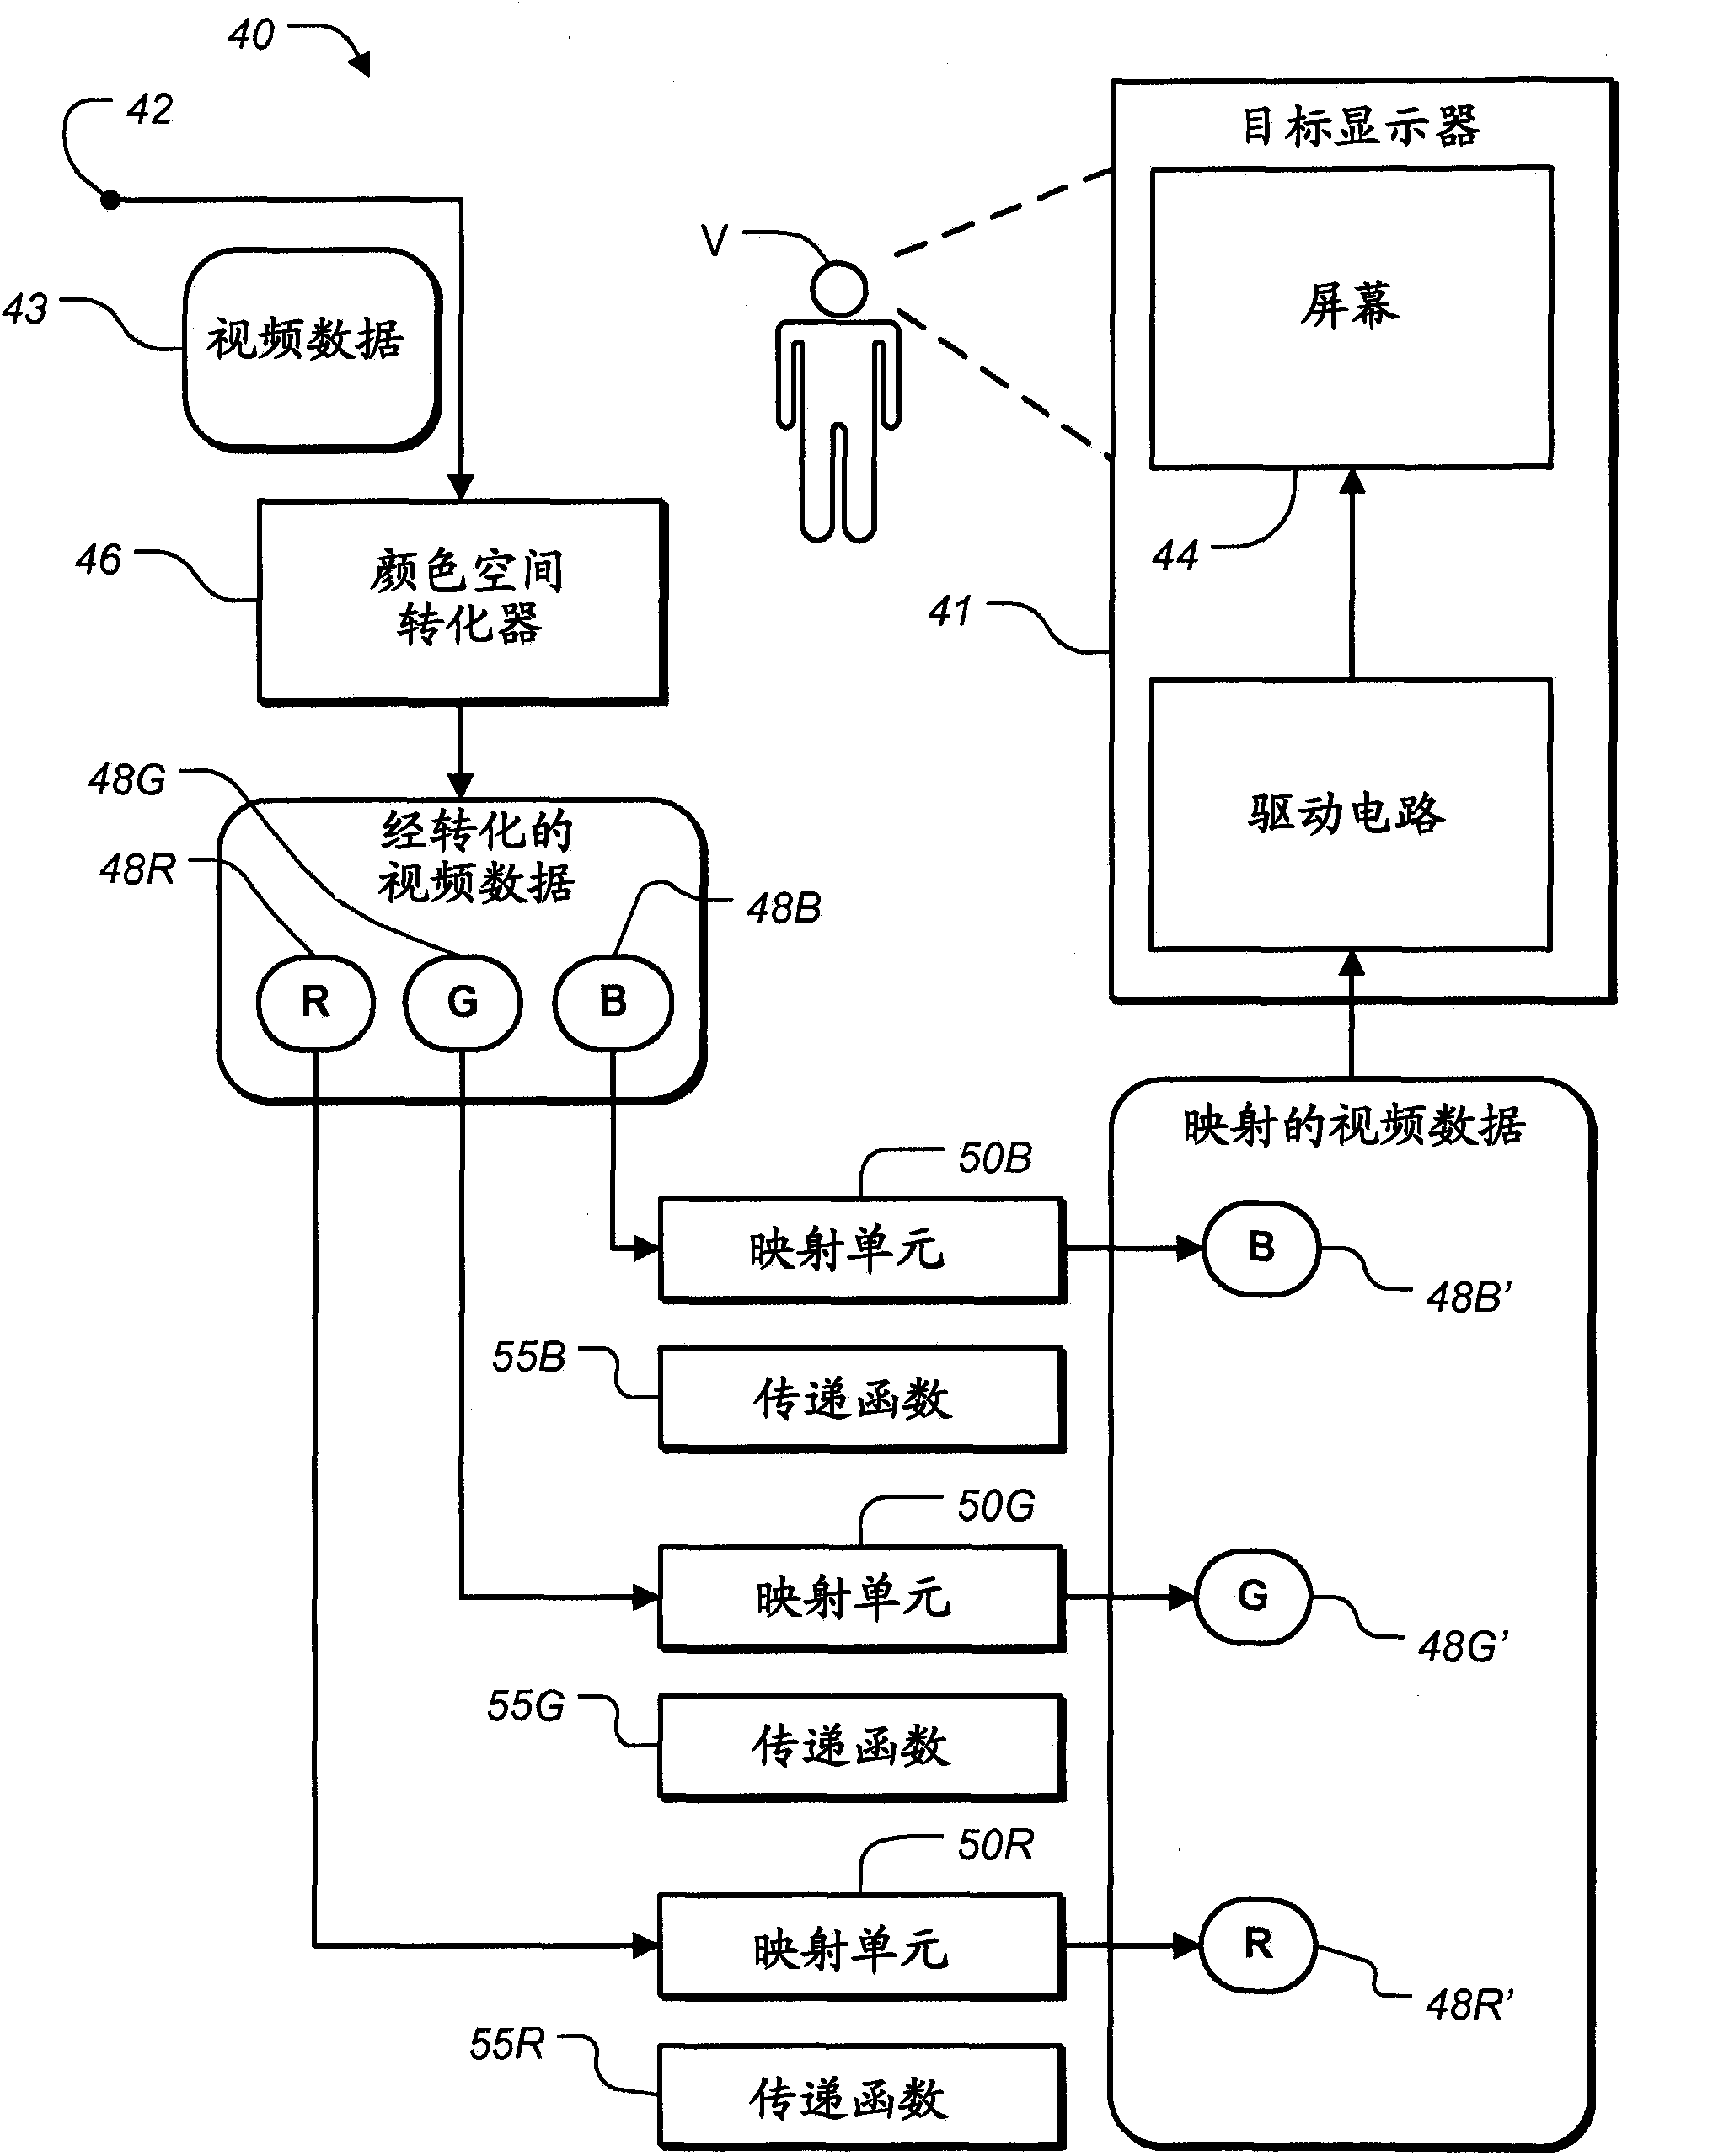 Method and apparatus for image data transformation